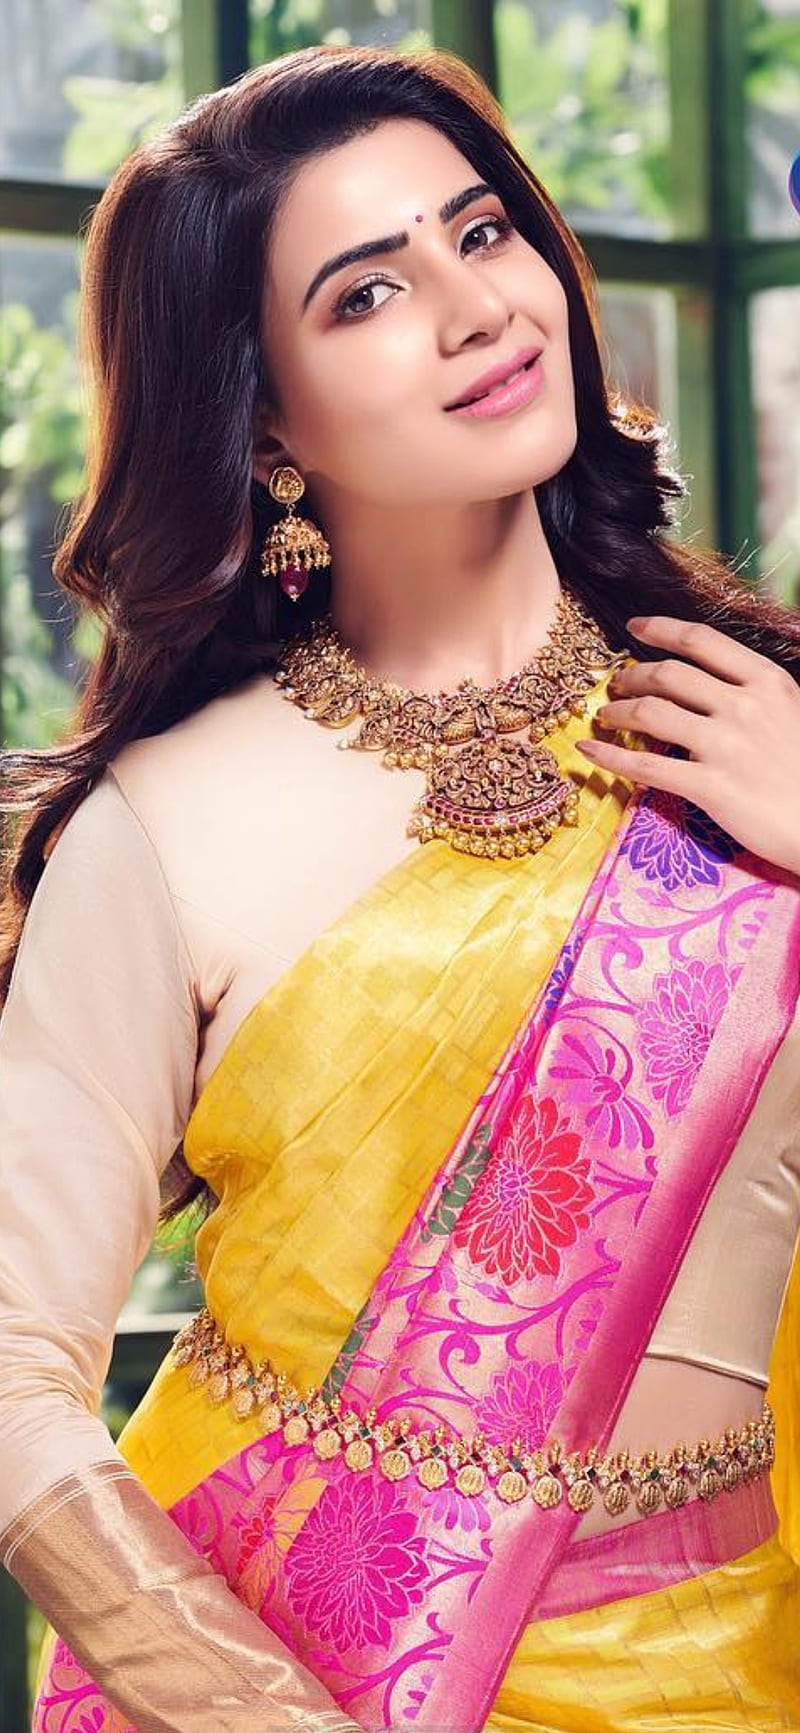 Samantha Akkineni will remind you of her wedding as she dresses up in bridal  wear [PHOTOS]